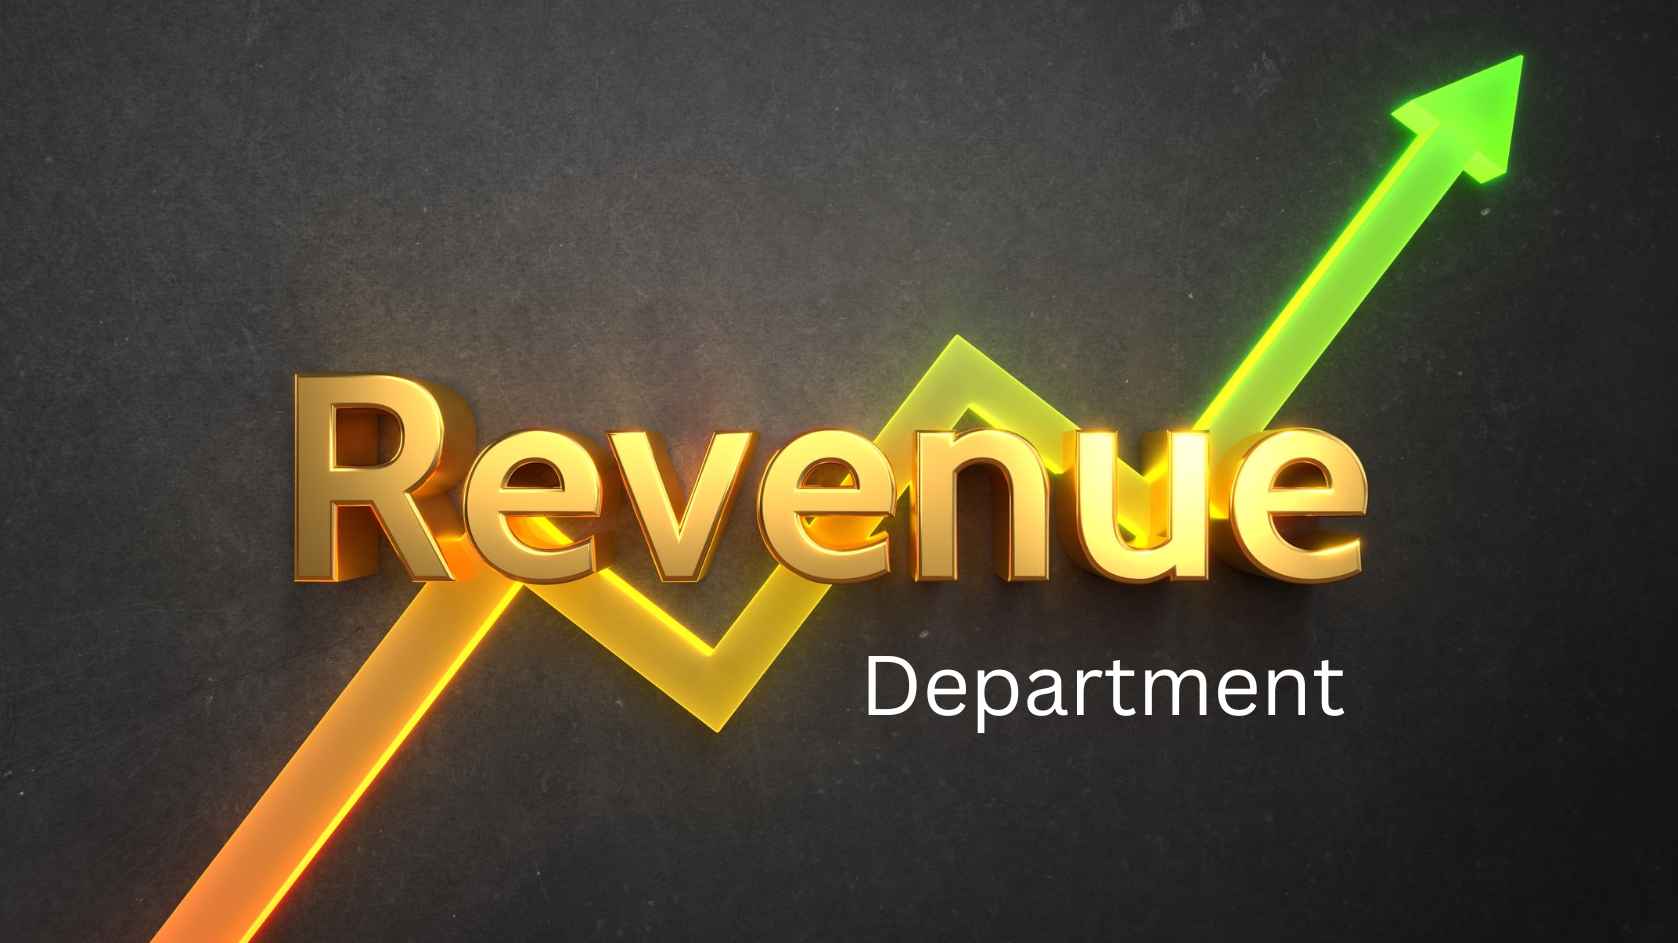  What Are The Functions Of the Revenue Department